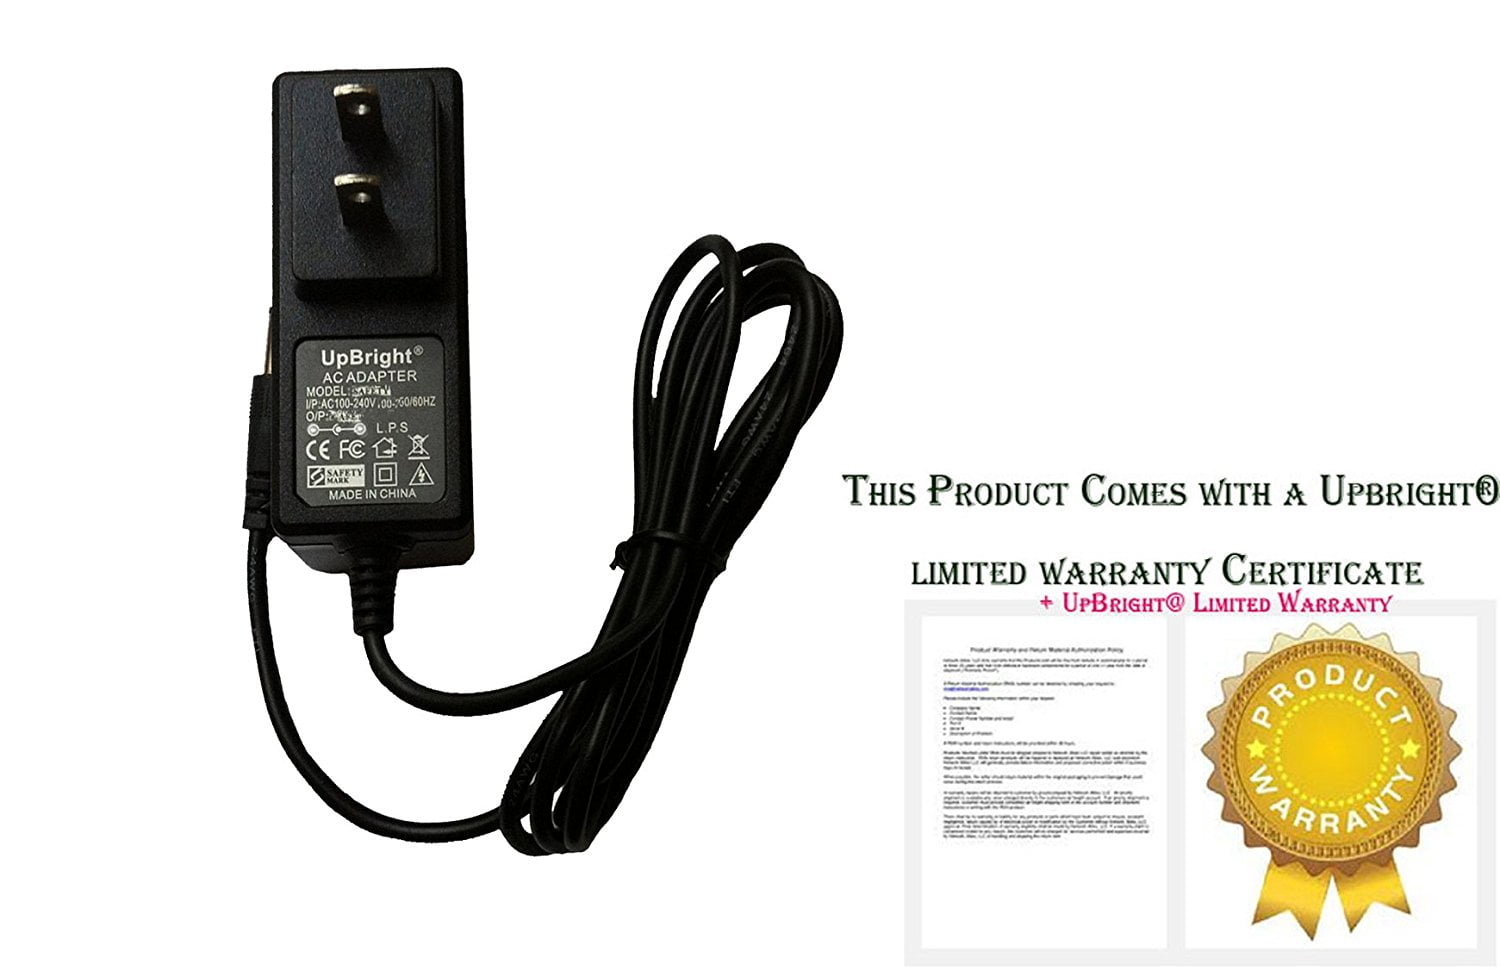 AC/DC Adapter Power Supply Charger Cord For Siemens Gigaset QV830 8" Tablet PC 